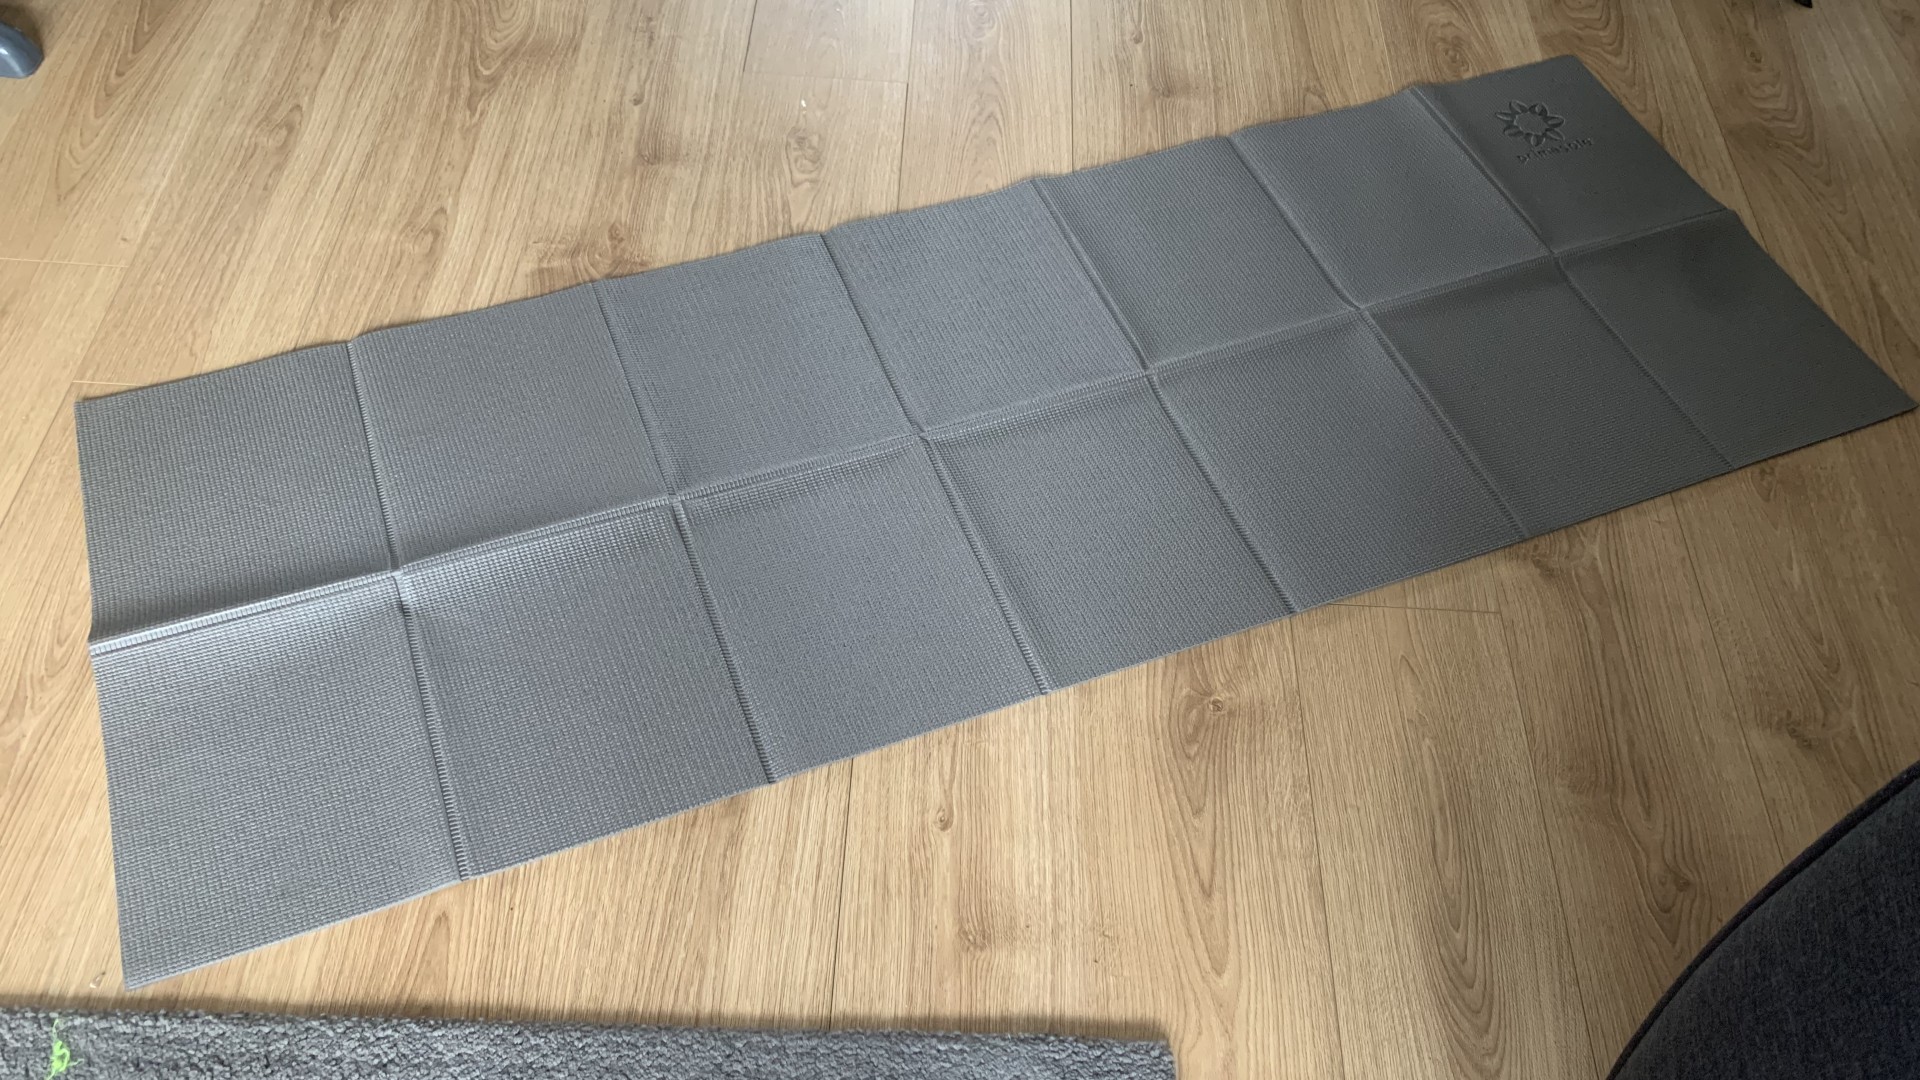 Primasole folding yoga mat unfolded and ready for use